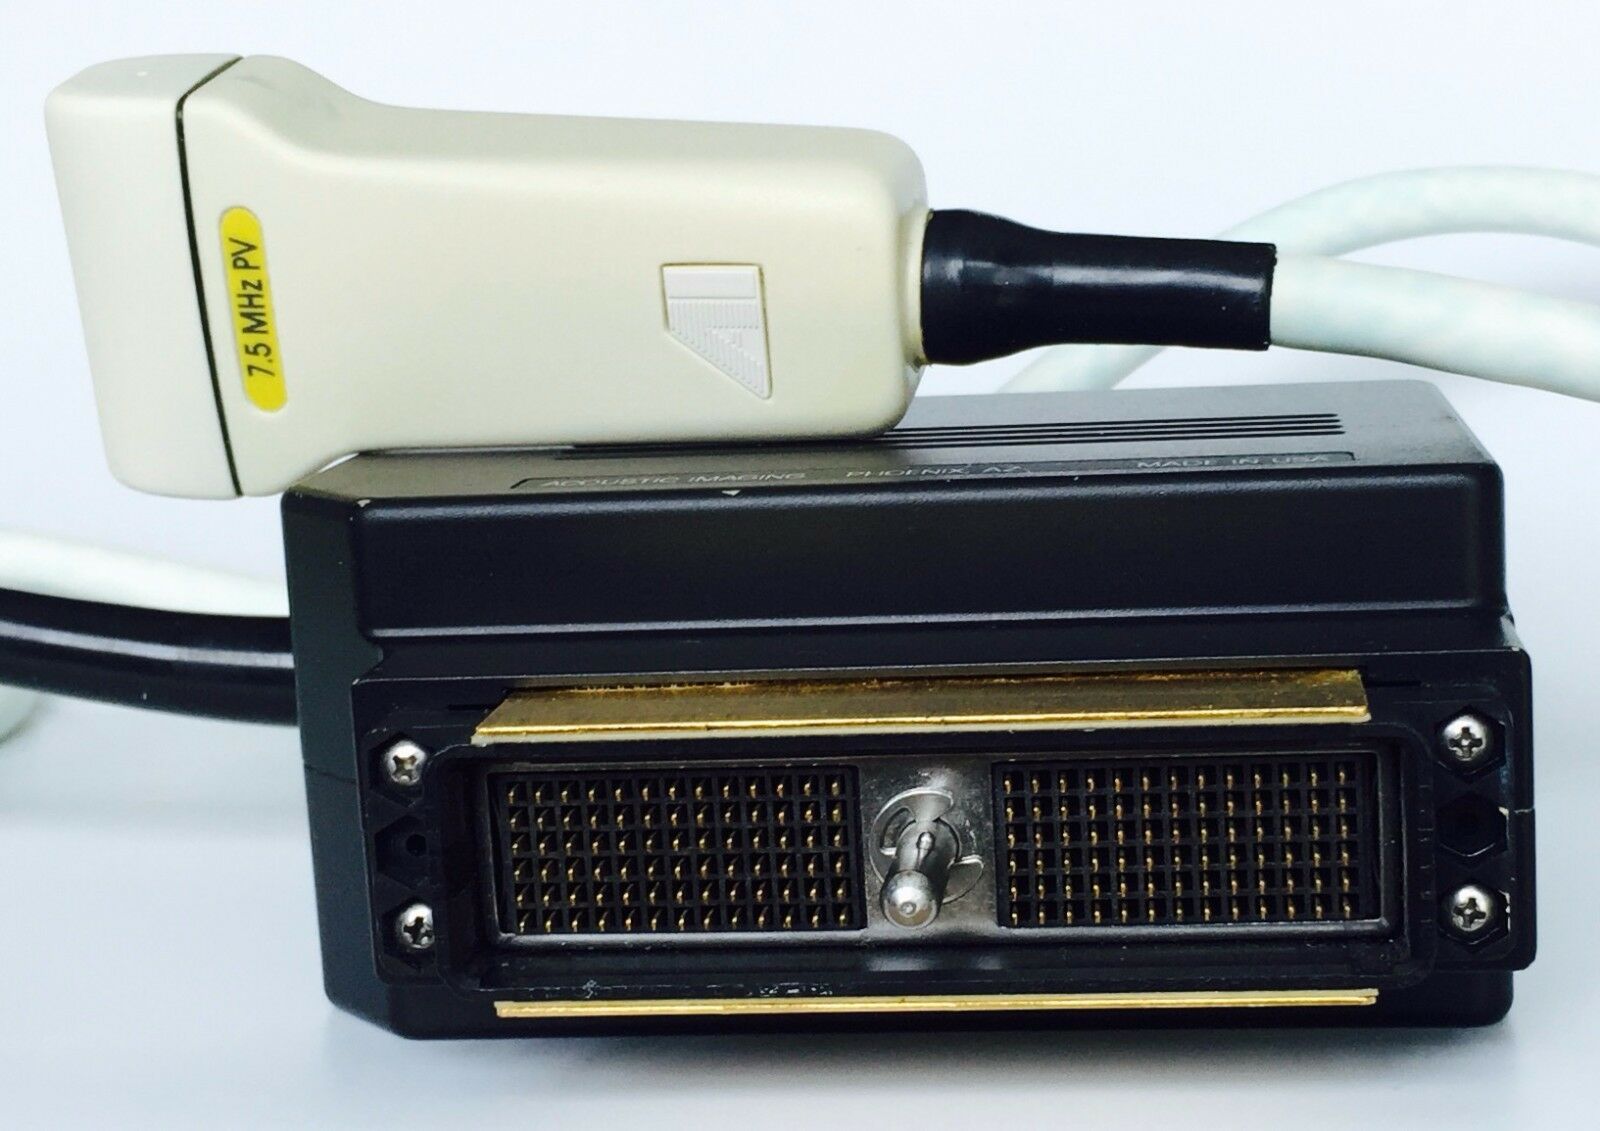 ACOUSTIC IMAGING PVLA 7.5 MHz. ULTRASOUND TRANSDUCER PROBE Used ~ full-tested DIAGNOSTIC ULTRASOUND MACHINES FOR SALE